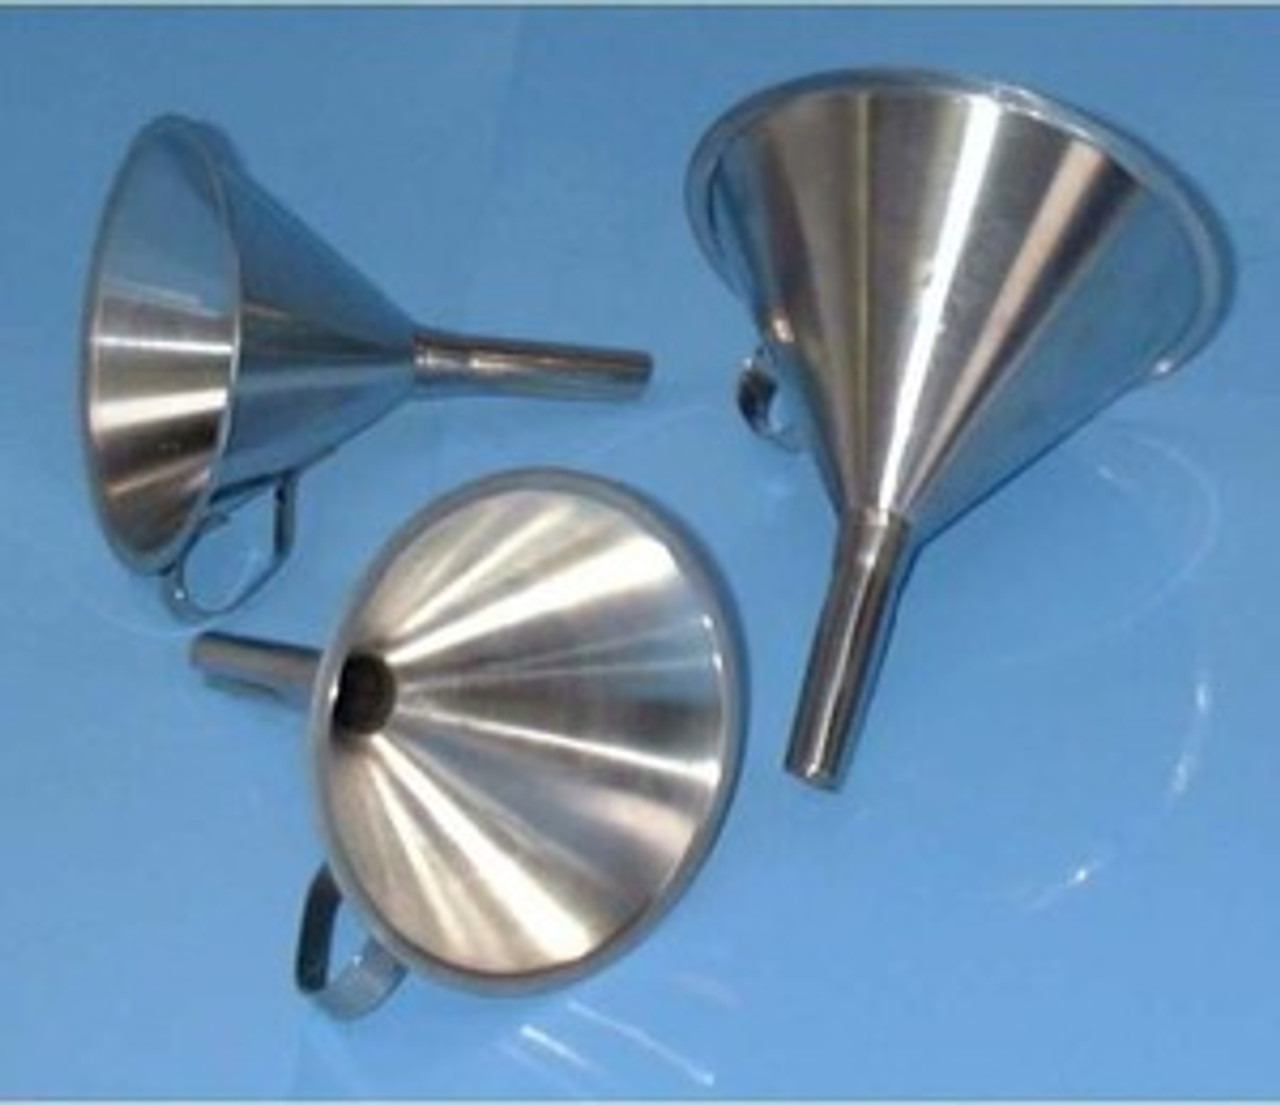 • 304 stainless steel
• Satin fi nish
• Fluted spout to aid product discharge